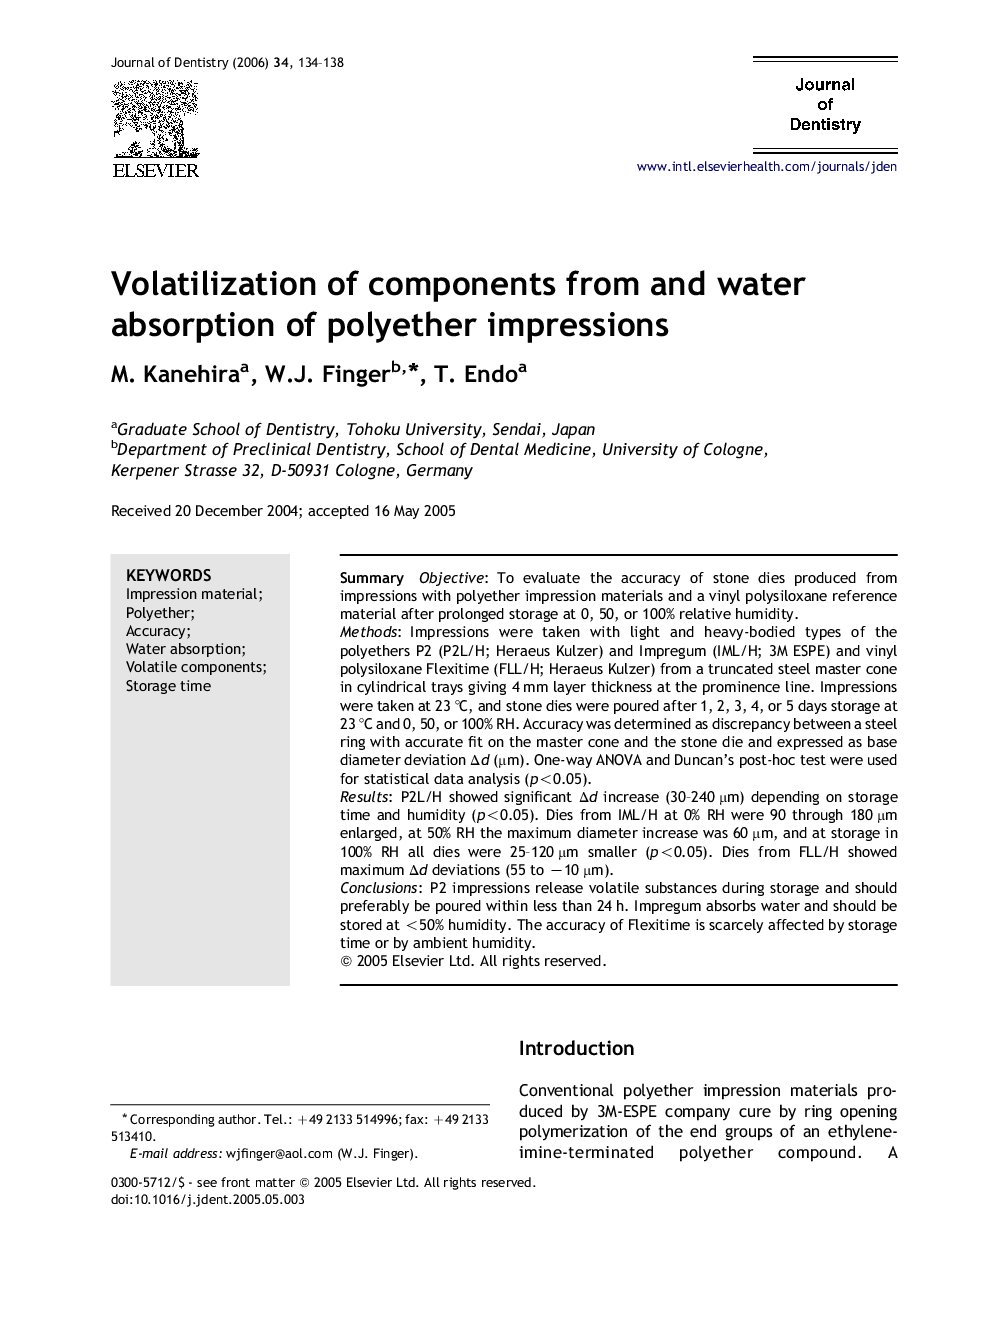 Volatilization of components from and water absorption of polyether impressions